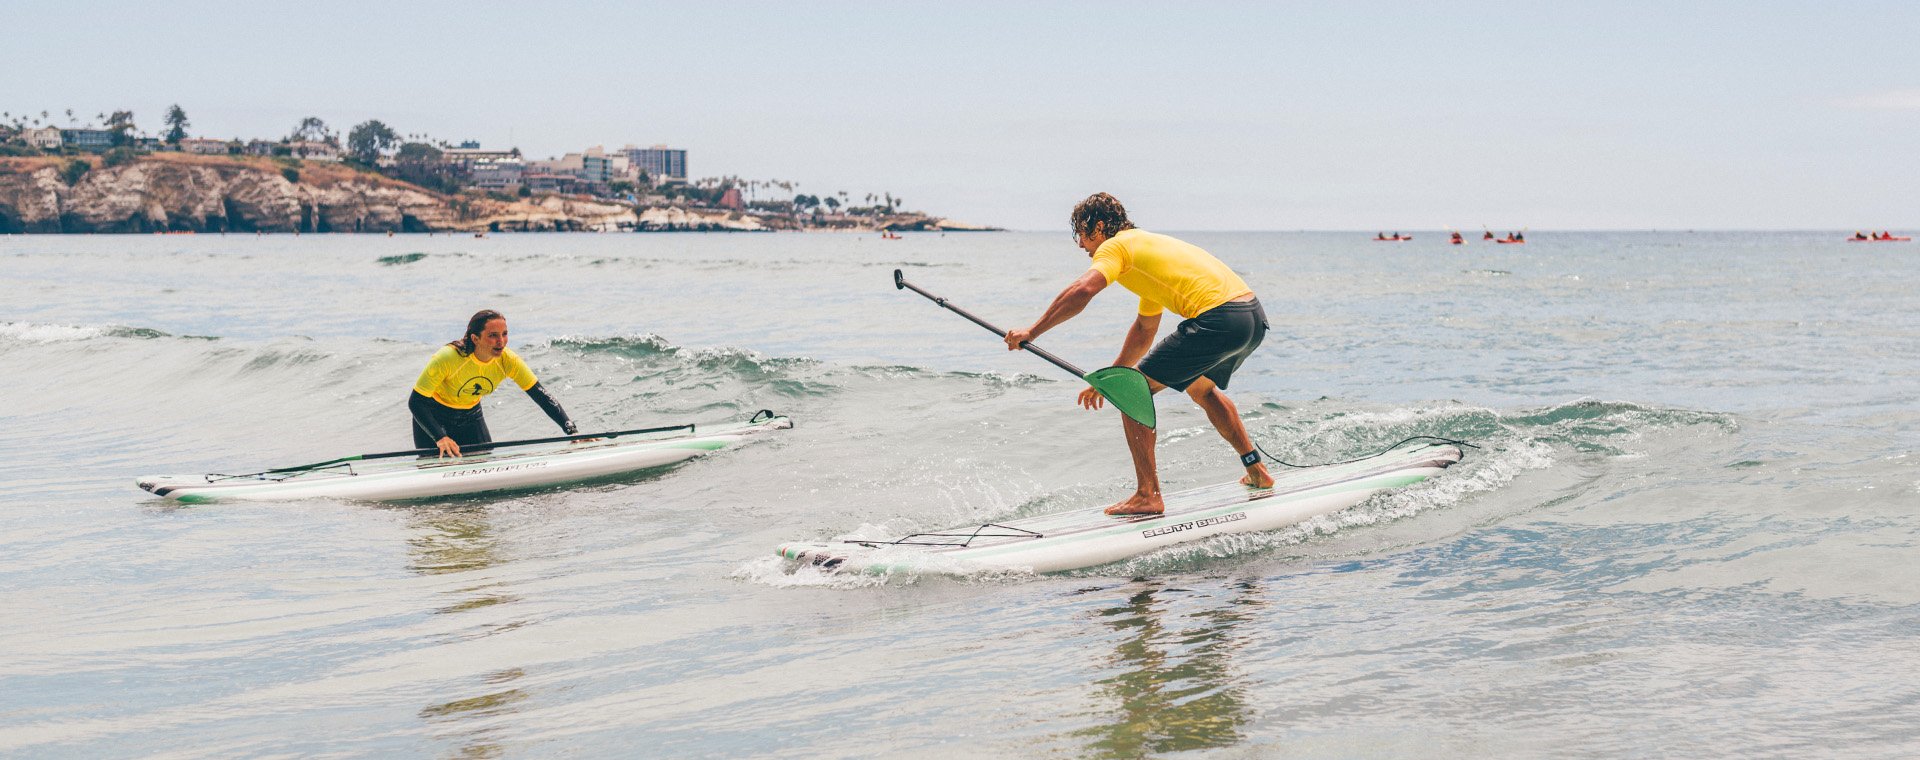 Lessons - Private SUP Lessons in La Jolla, California with Everyday California